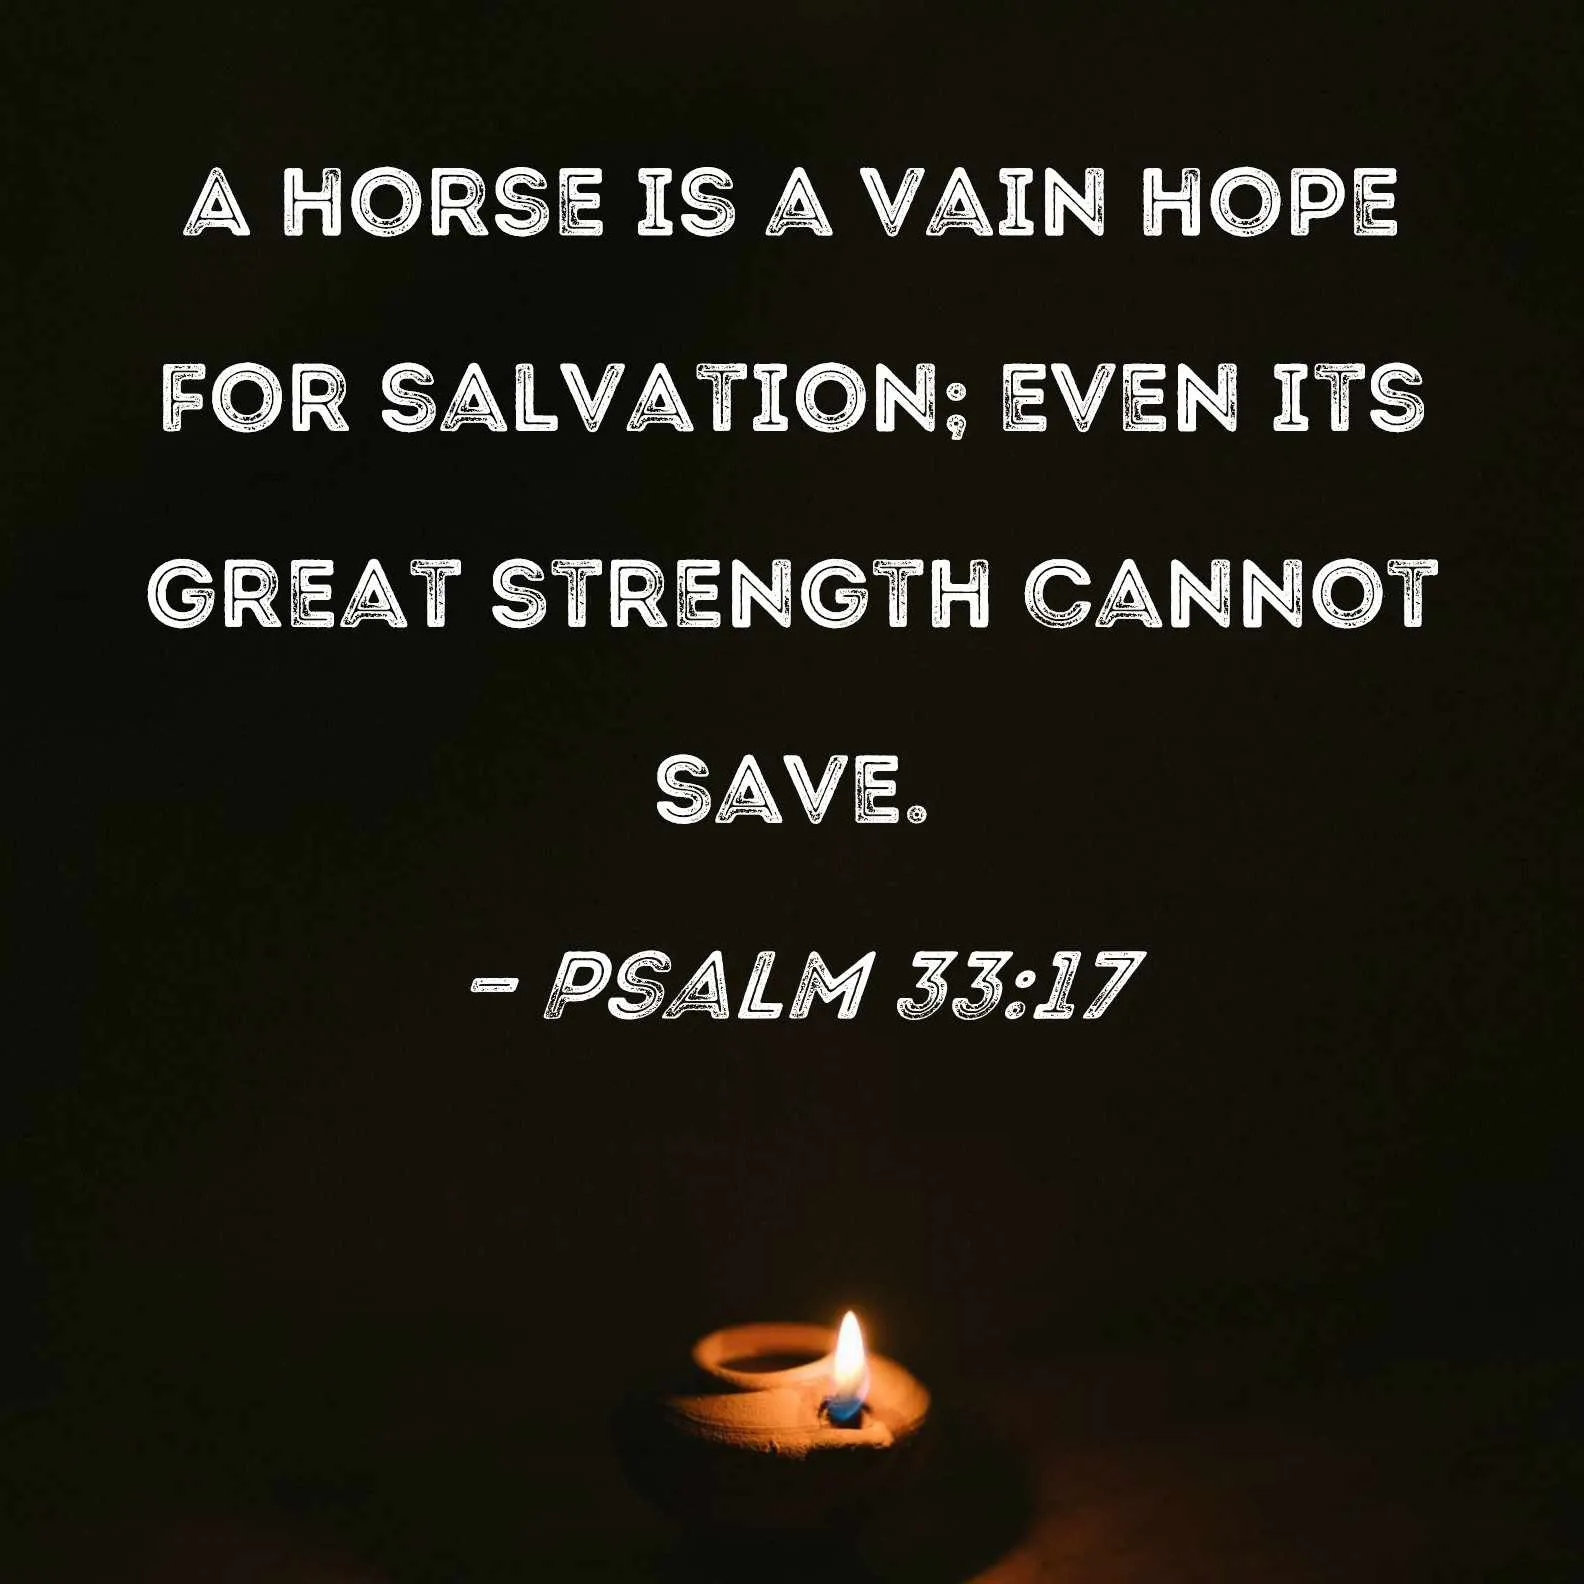 Jesus known as The Horse in Hebrew